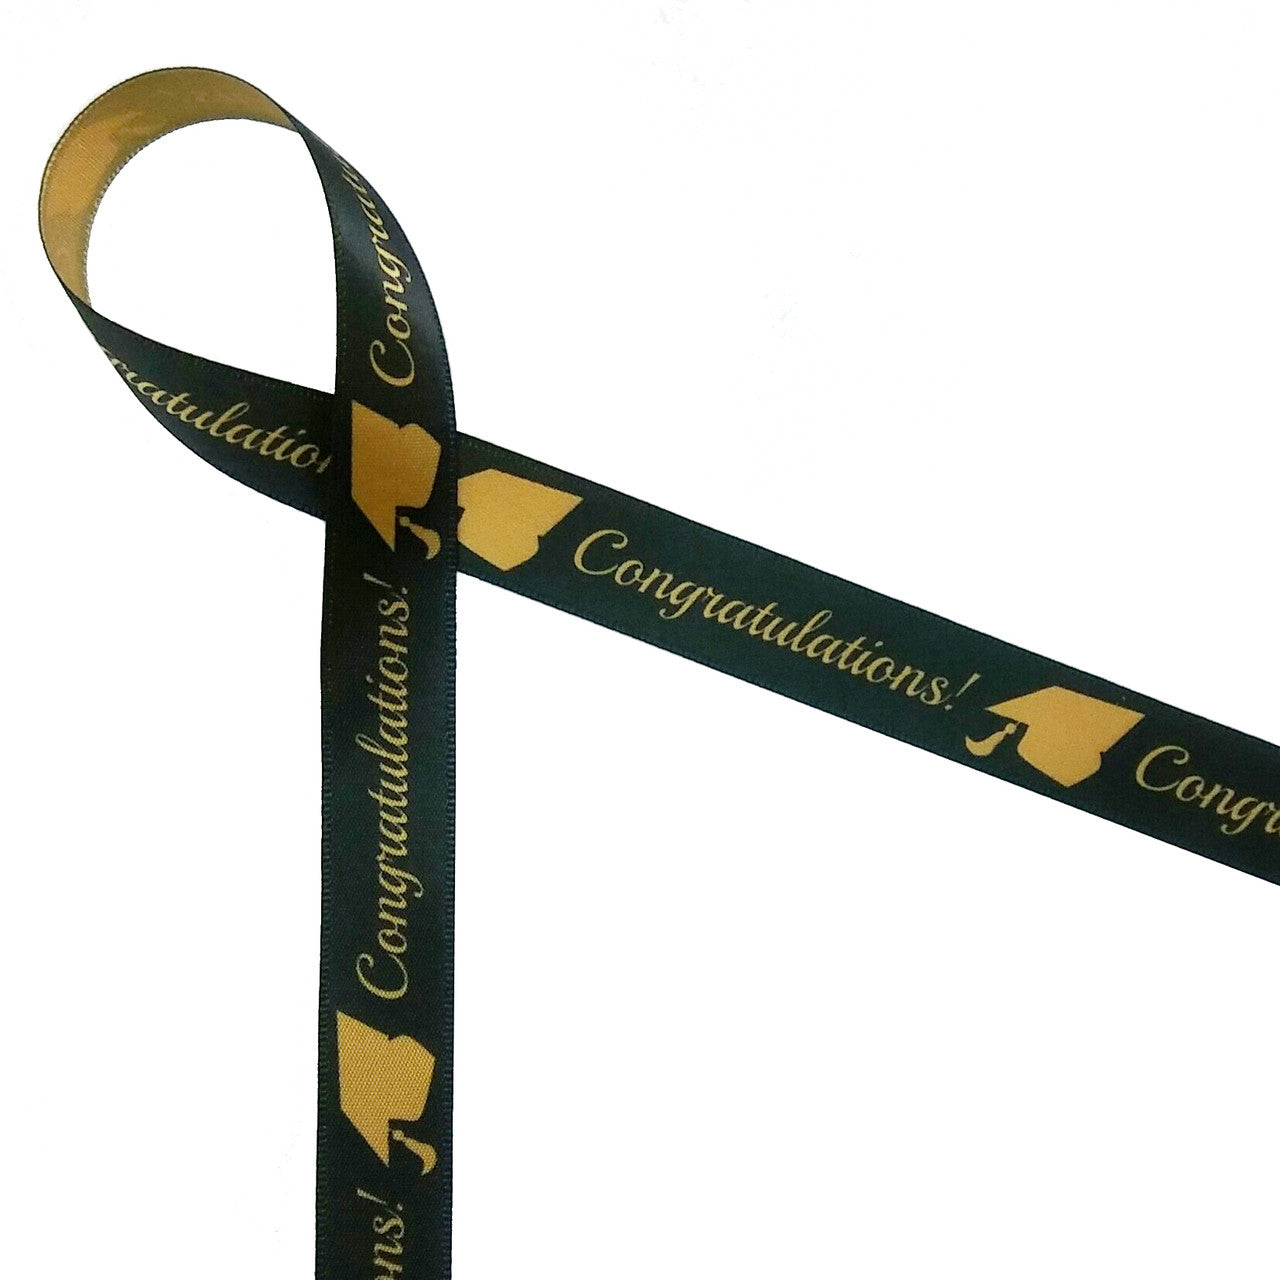 Congratulations to the graduate! Our sophisticated black and gold ribbon with grad hats and Congratulations script is the perfect addition to a gift for someone receiving a Masters or doctorate degree!